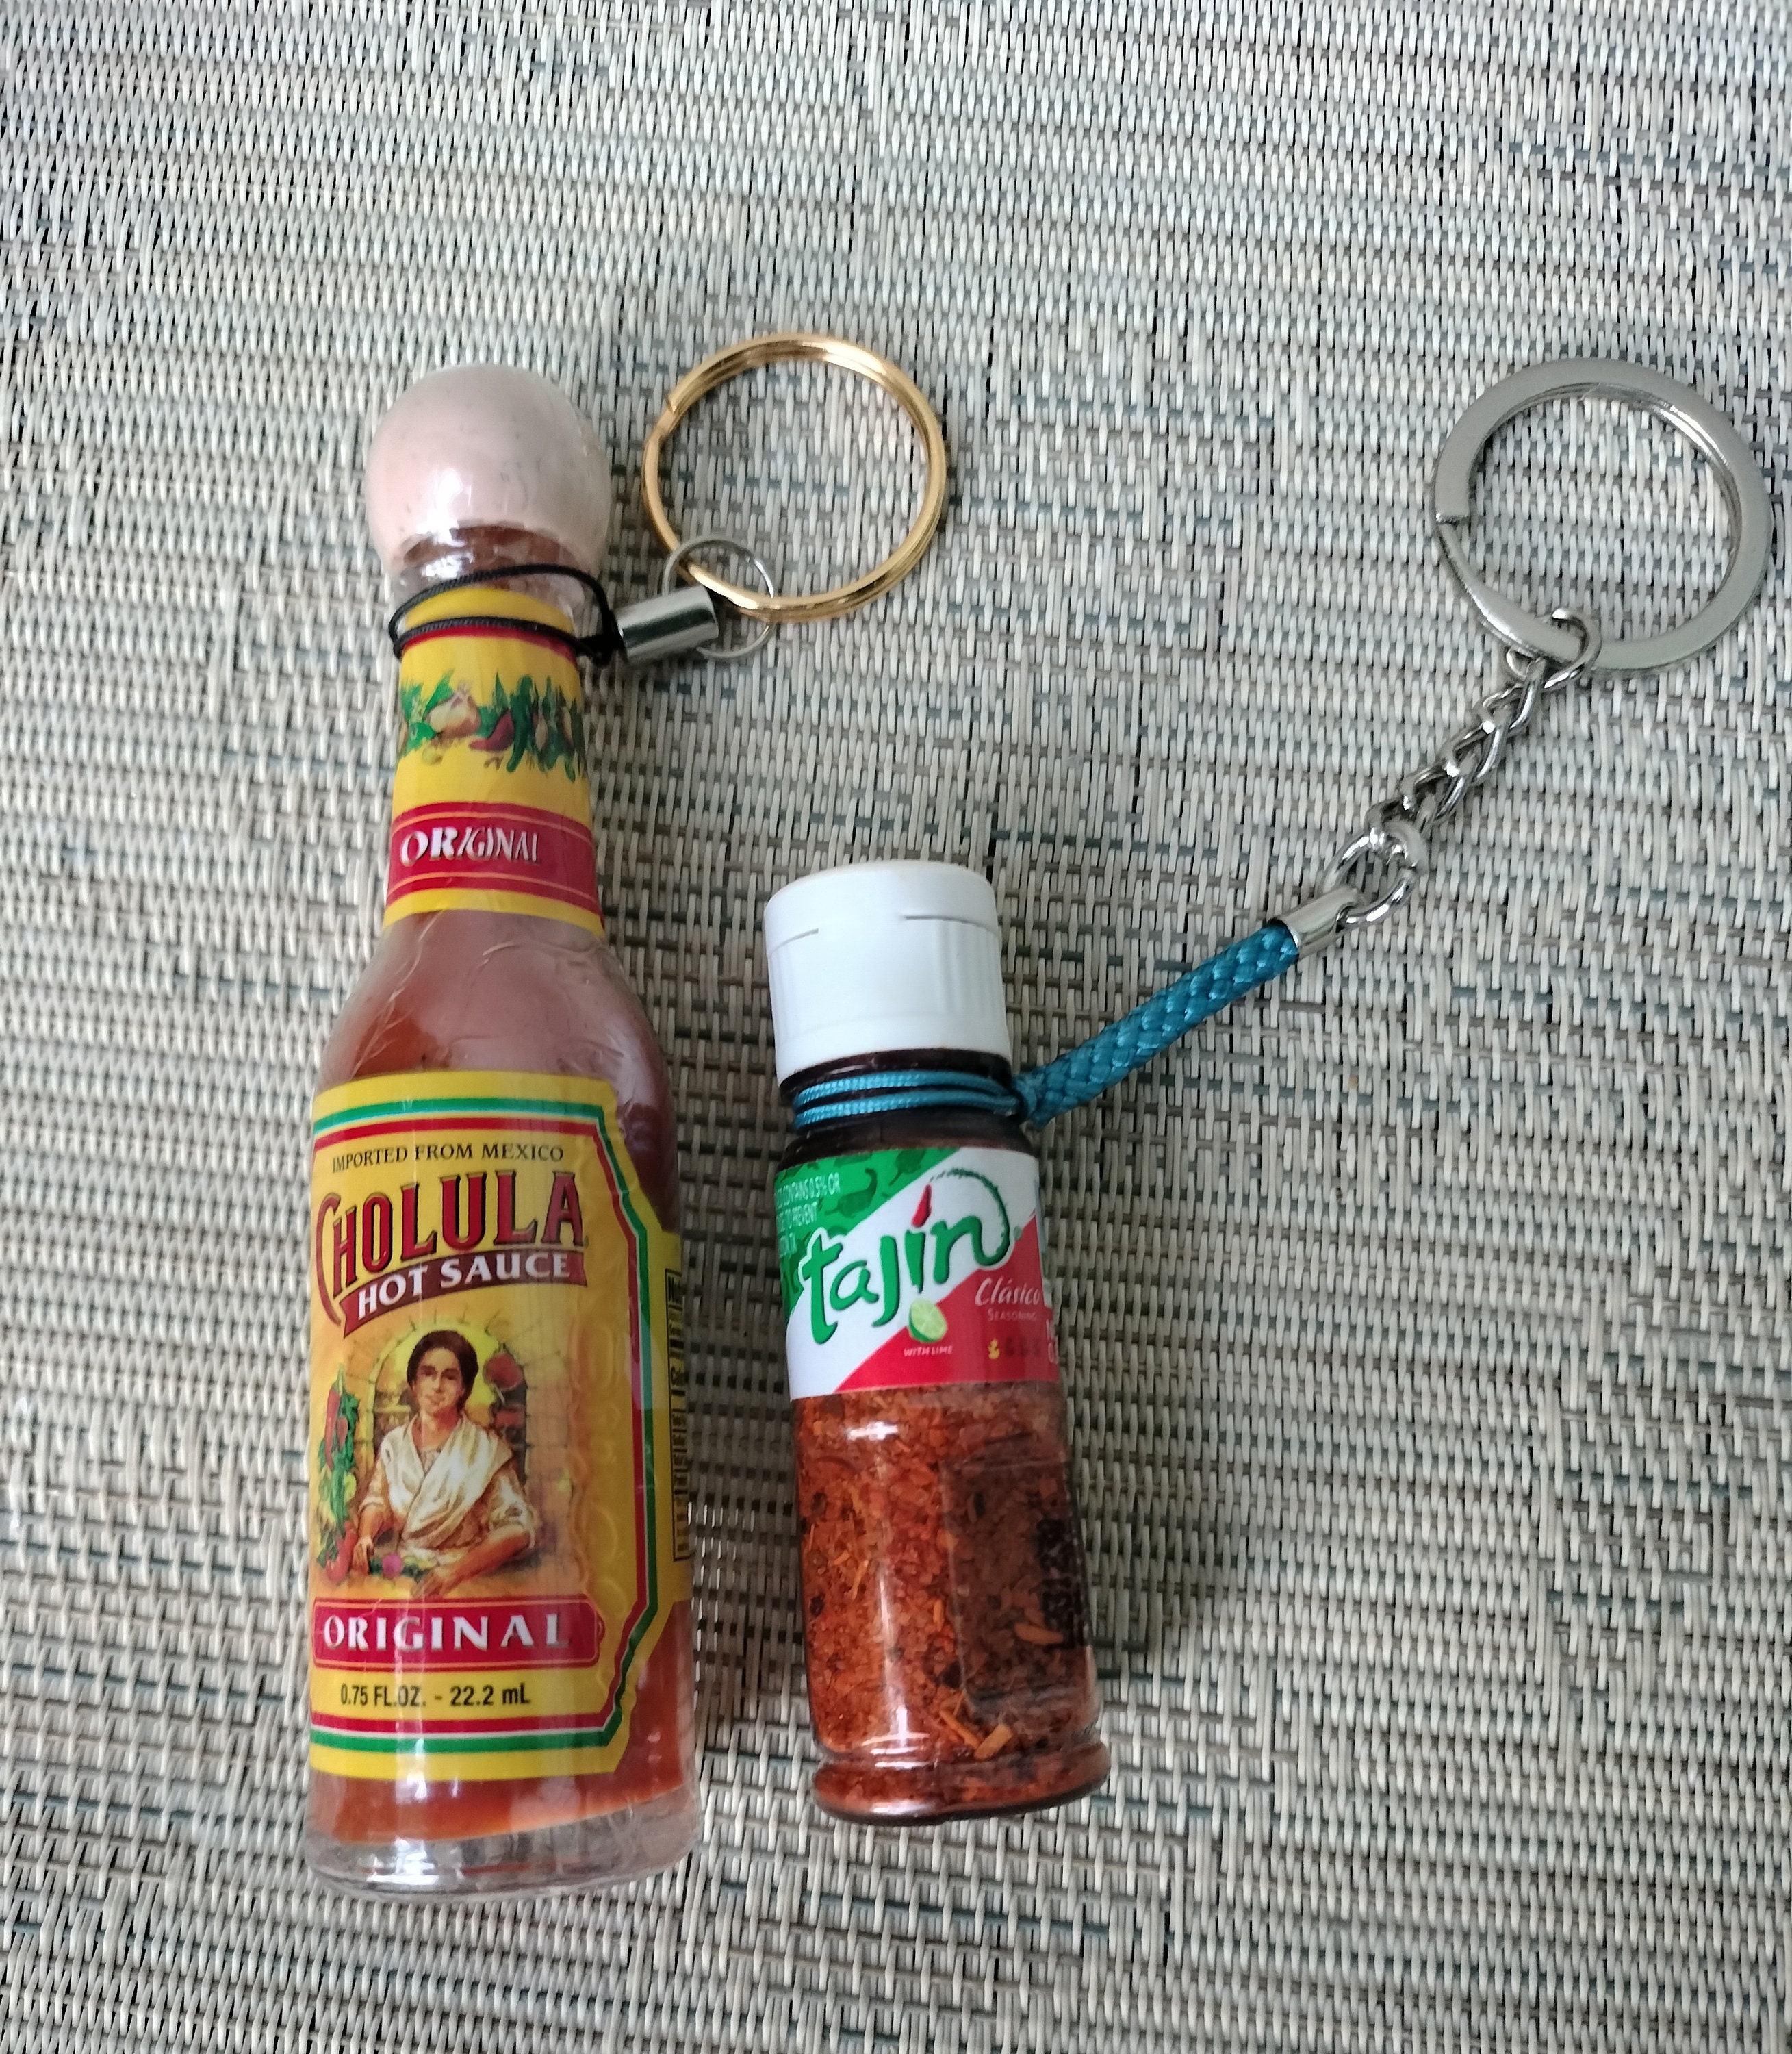  Porter Trail GENUINE LEATHER HOT SAUCE KEYCHAIN Includes a .75  oz Cholula Hot Sauce Bottle - Portable Hot Sauce for On the Go or Travel -  Mini Hot Sauce Holder